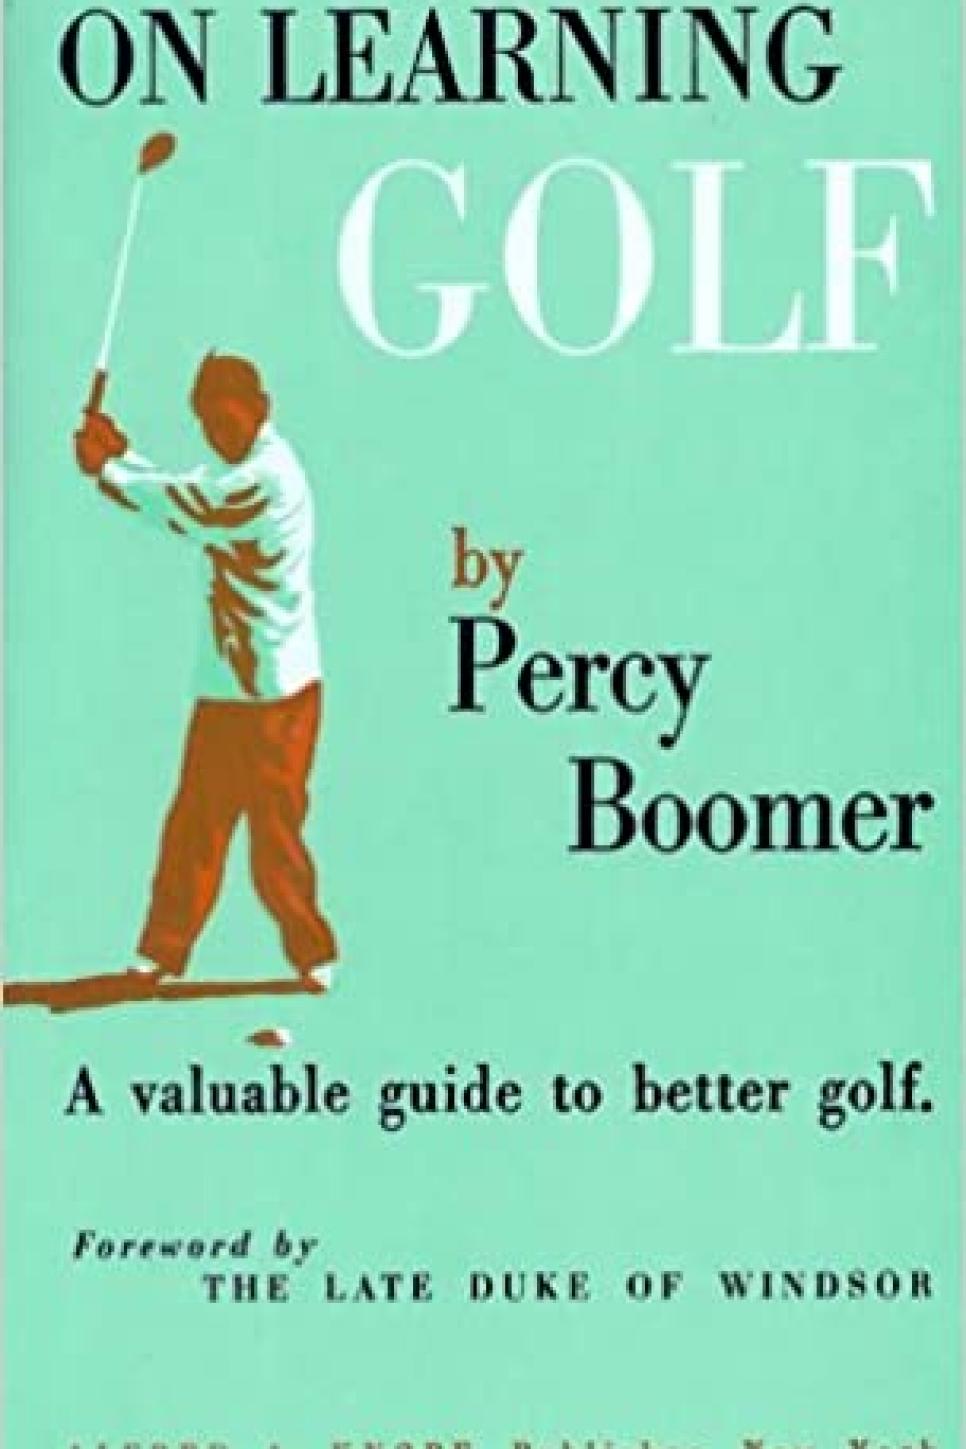 On Learning Golf By Percy Boomer (1946)